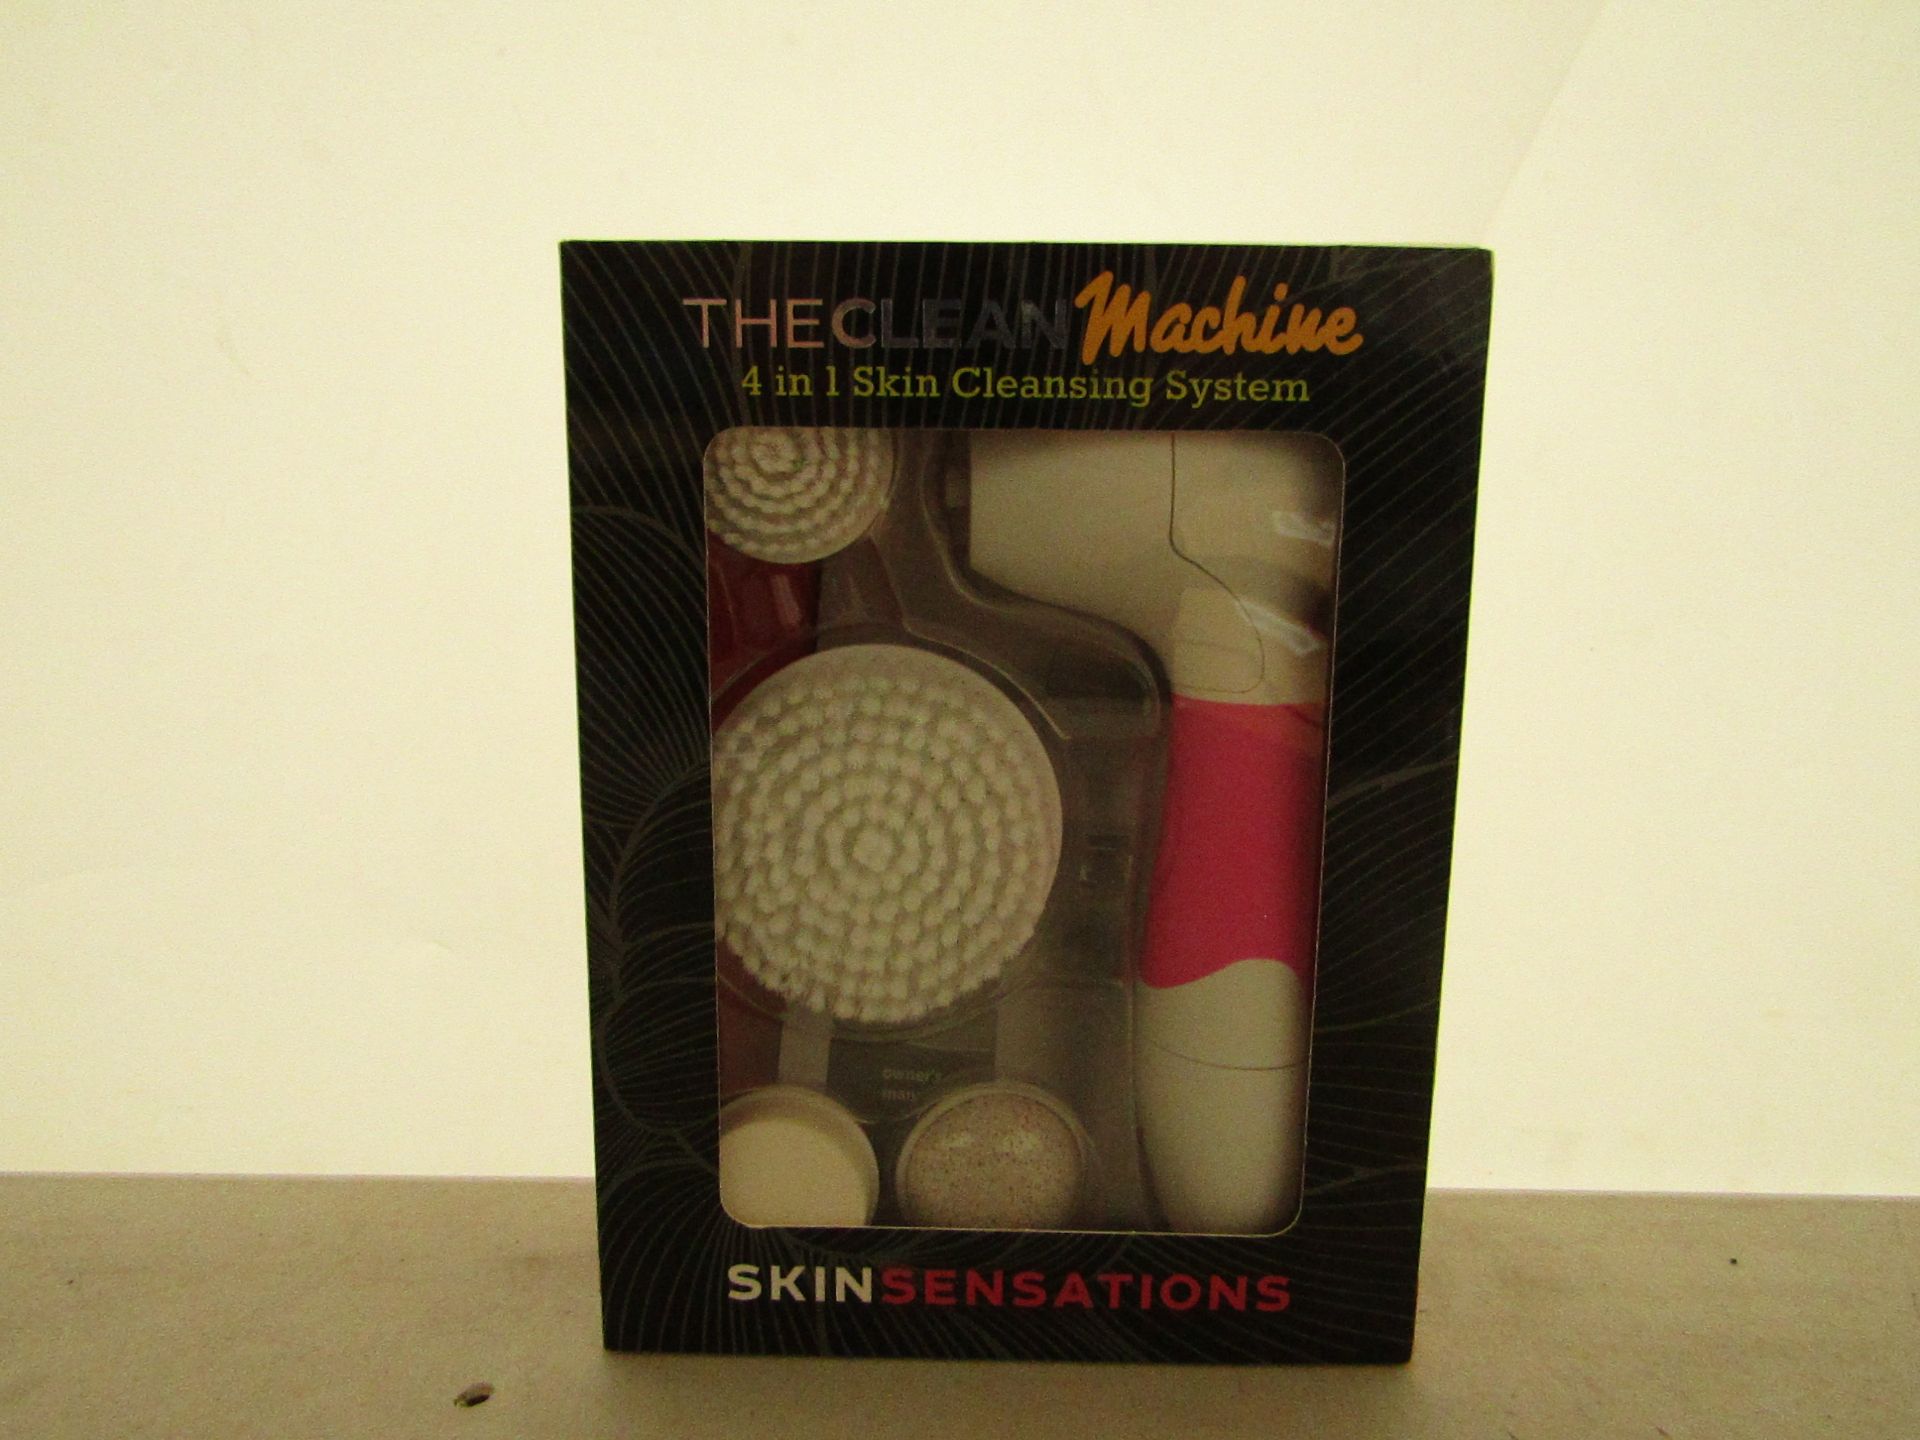 The clean machine skin sensations 4 in 1 skin cleansing system, new and boxed.